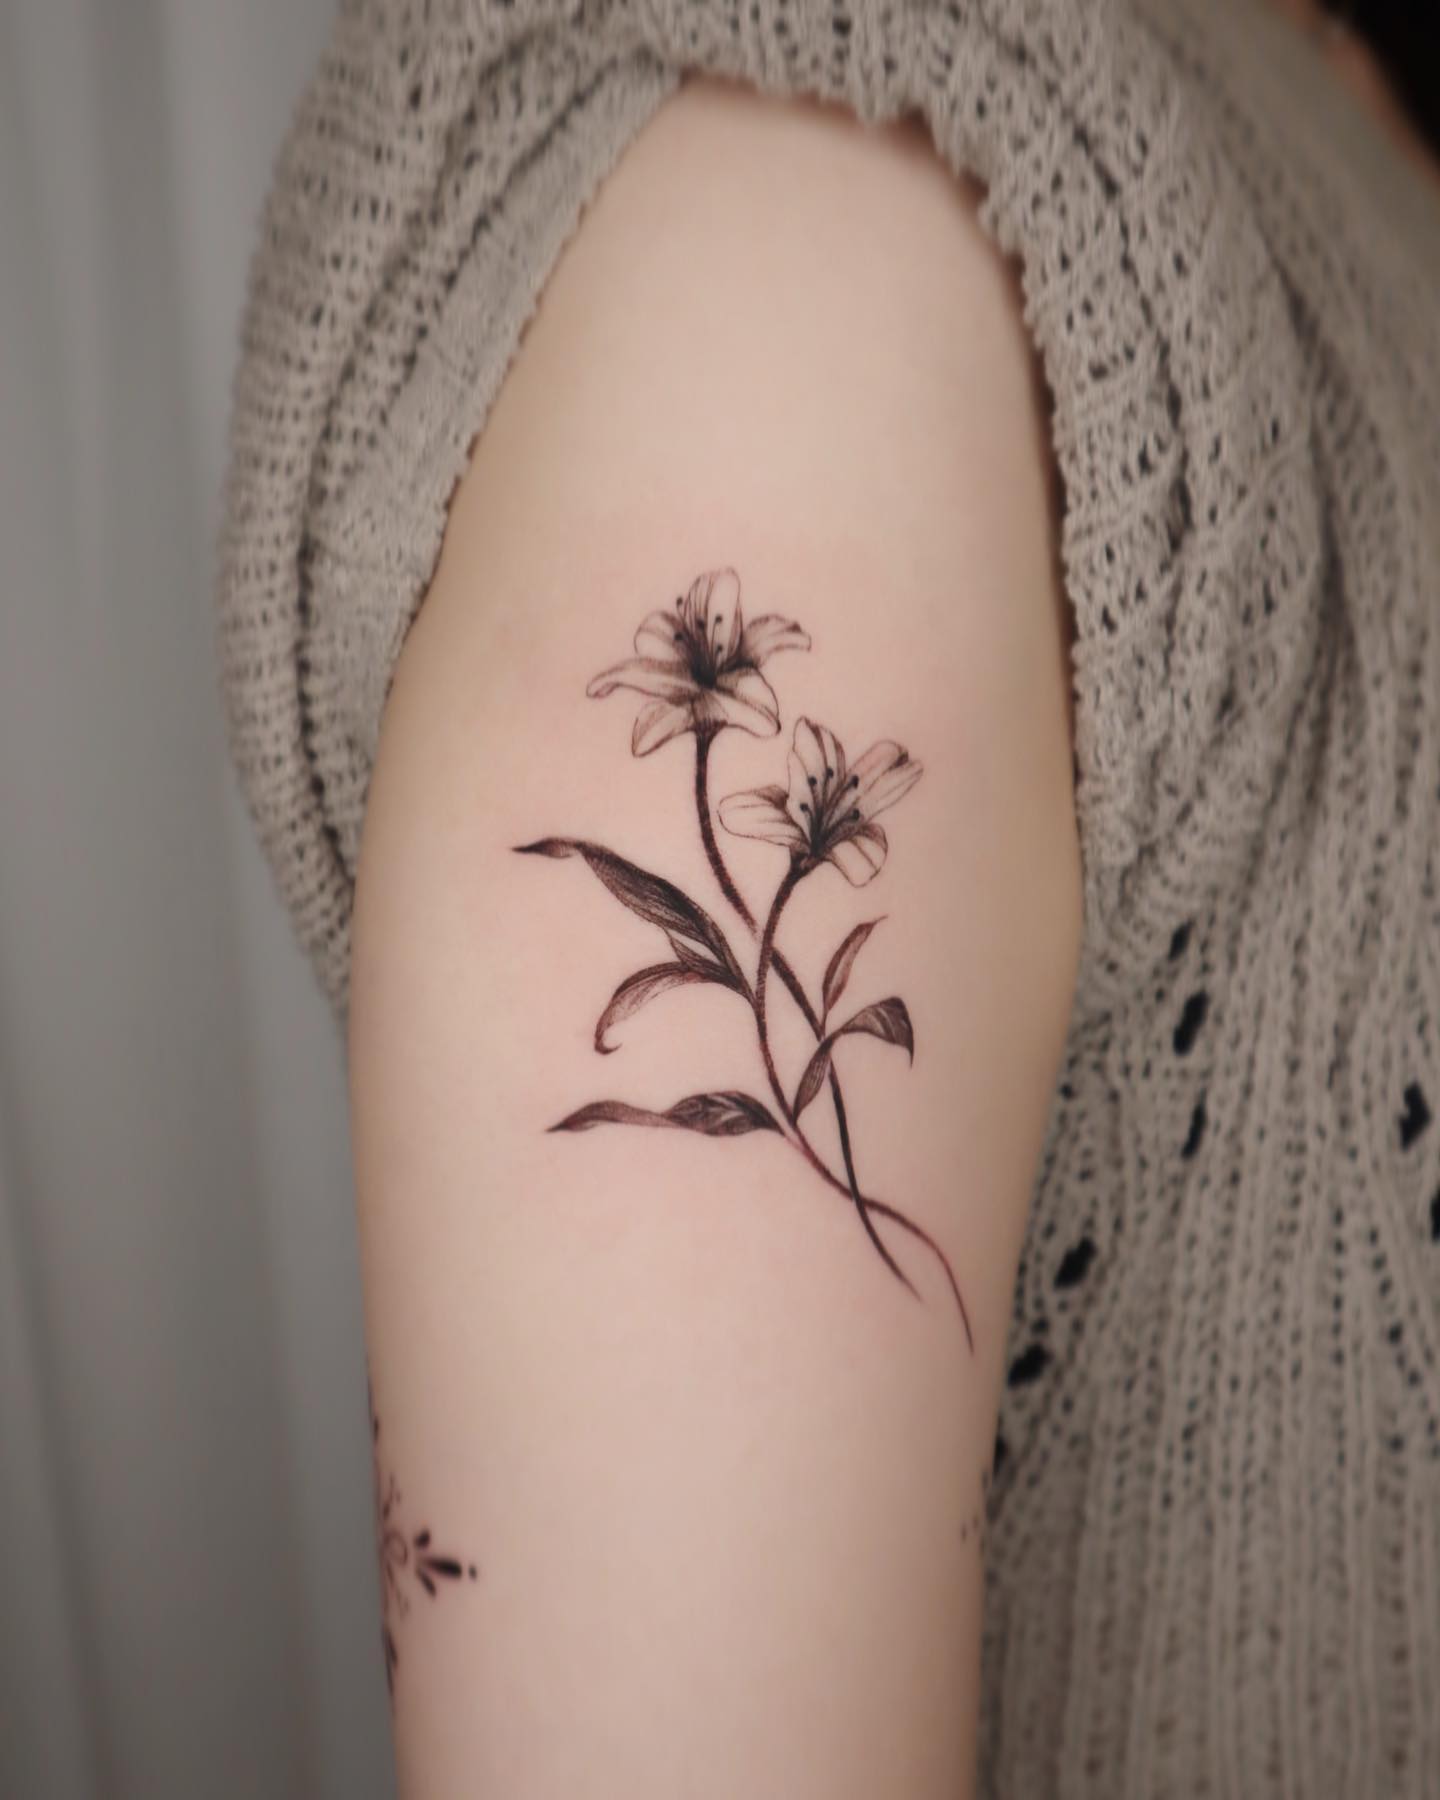 Two blackwork lilies tattoos are a simple, elegant design that can be done in a variety of ways. They're usually done in black ink, just like in the example below but you can also get them in other colors. Your arm will shine with them.